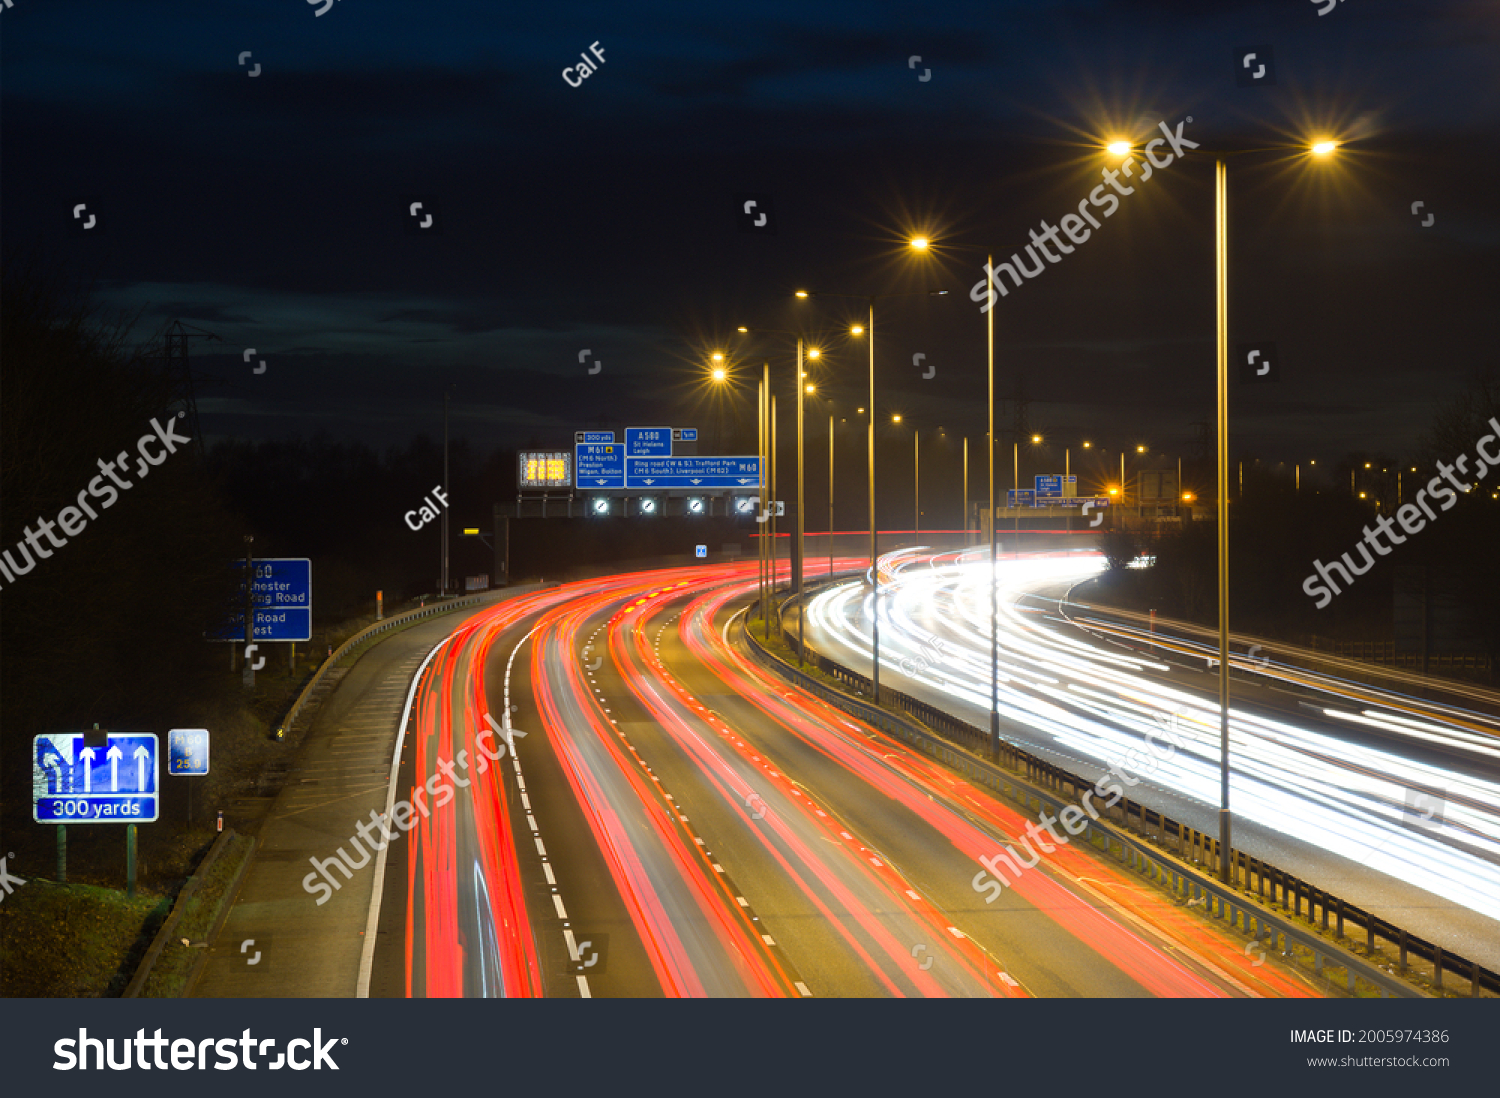 Smart motorway in England, UK with light trails signifying busy traffic at rush hour. The NSL symbols under the gantry sign signify an end to speed restrictions. #2005974386